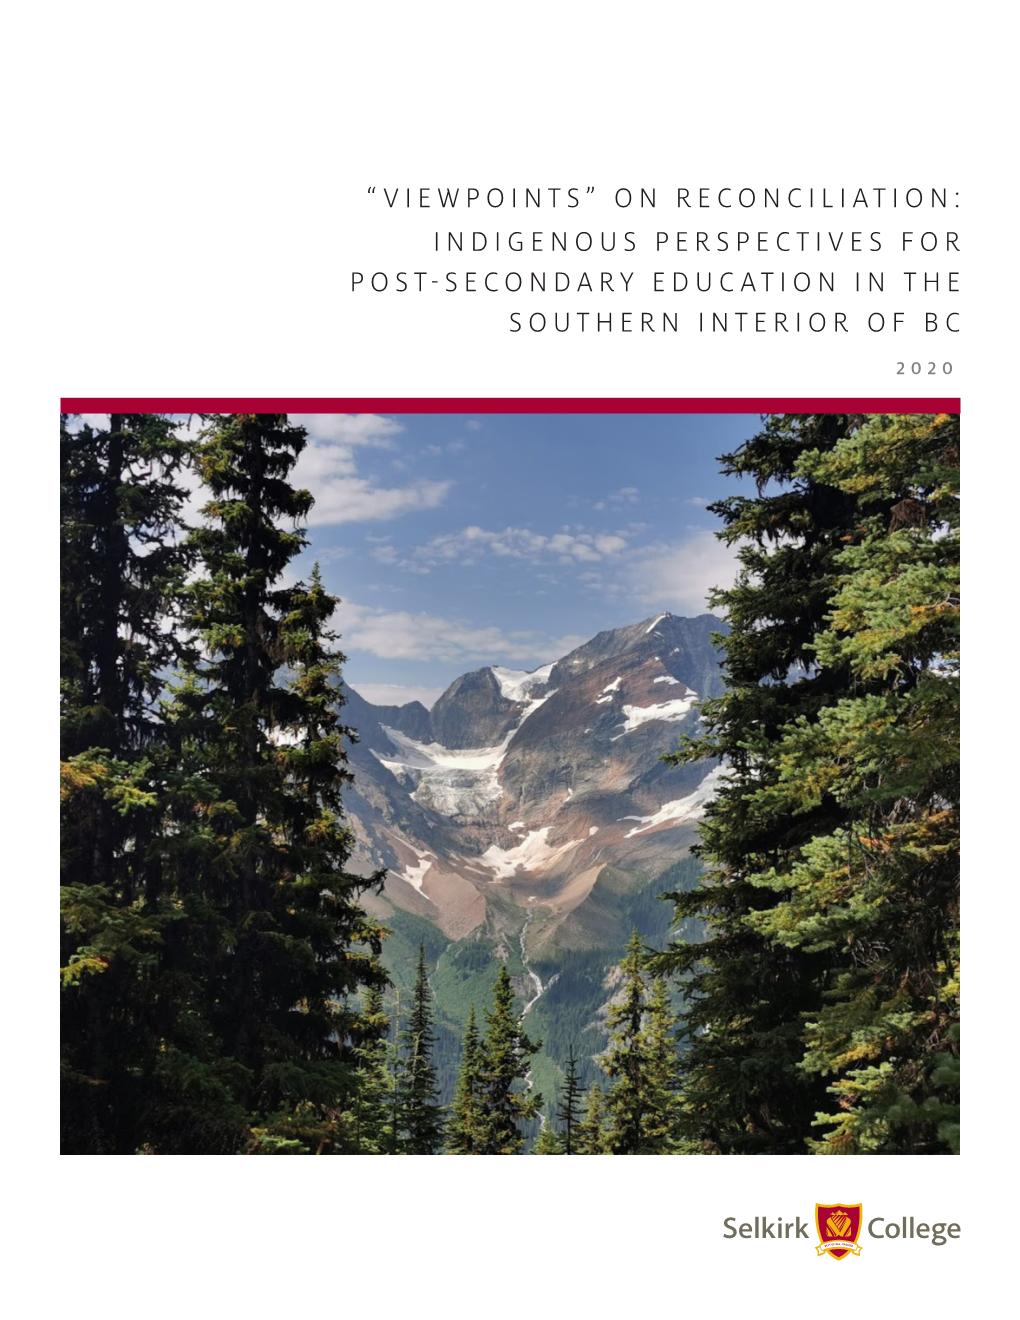 “Viewpoints” on Reconciliation: Indigenous Perspectives for Post-Secondary Education in the Southern Interior of Bc